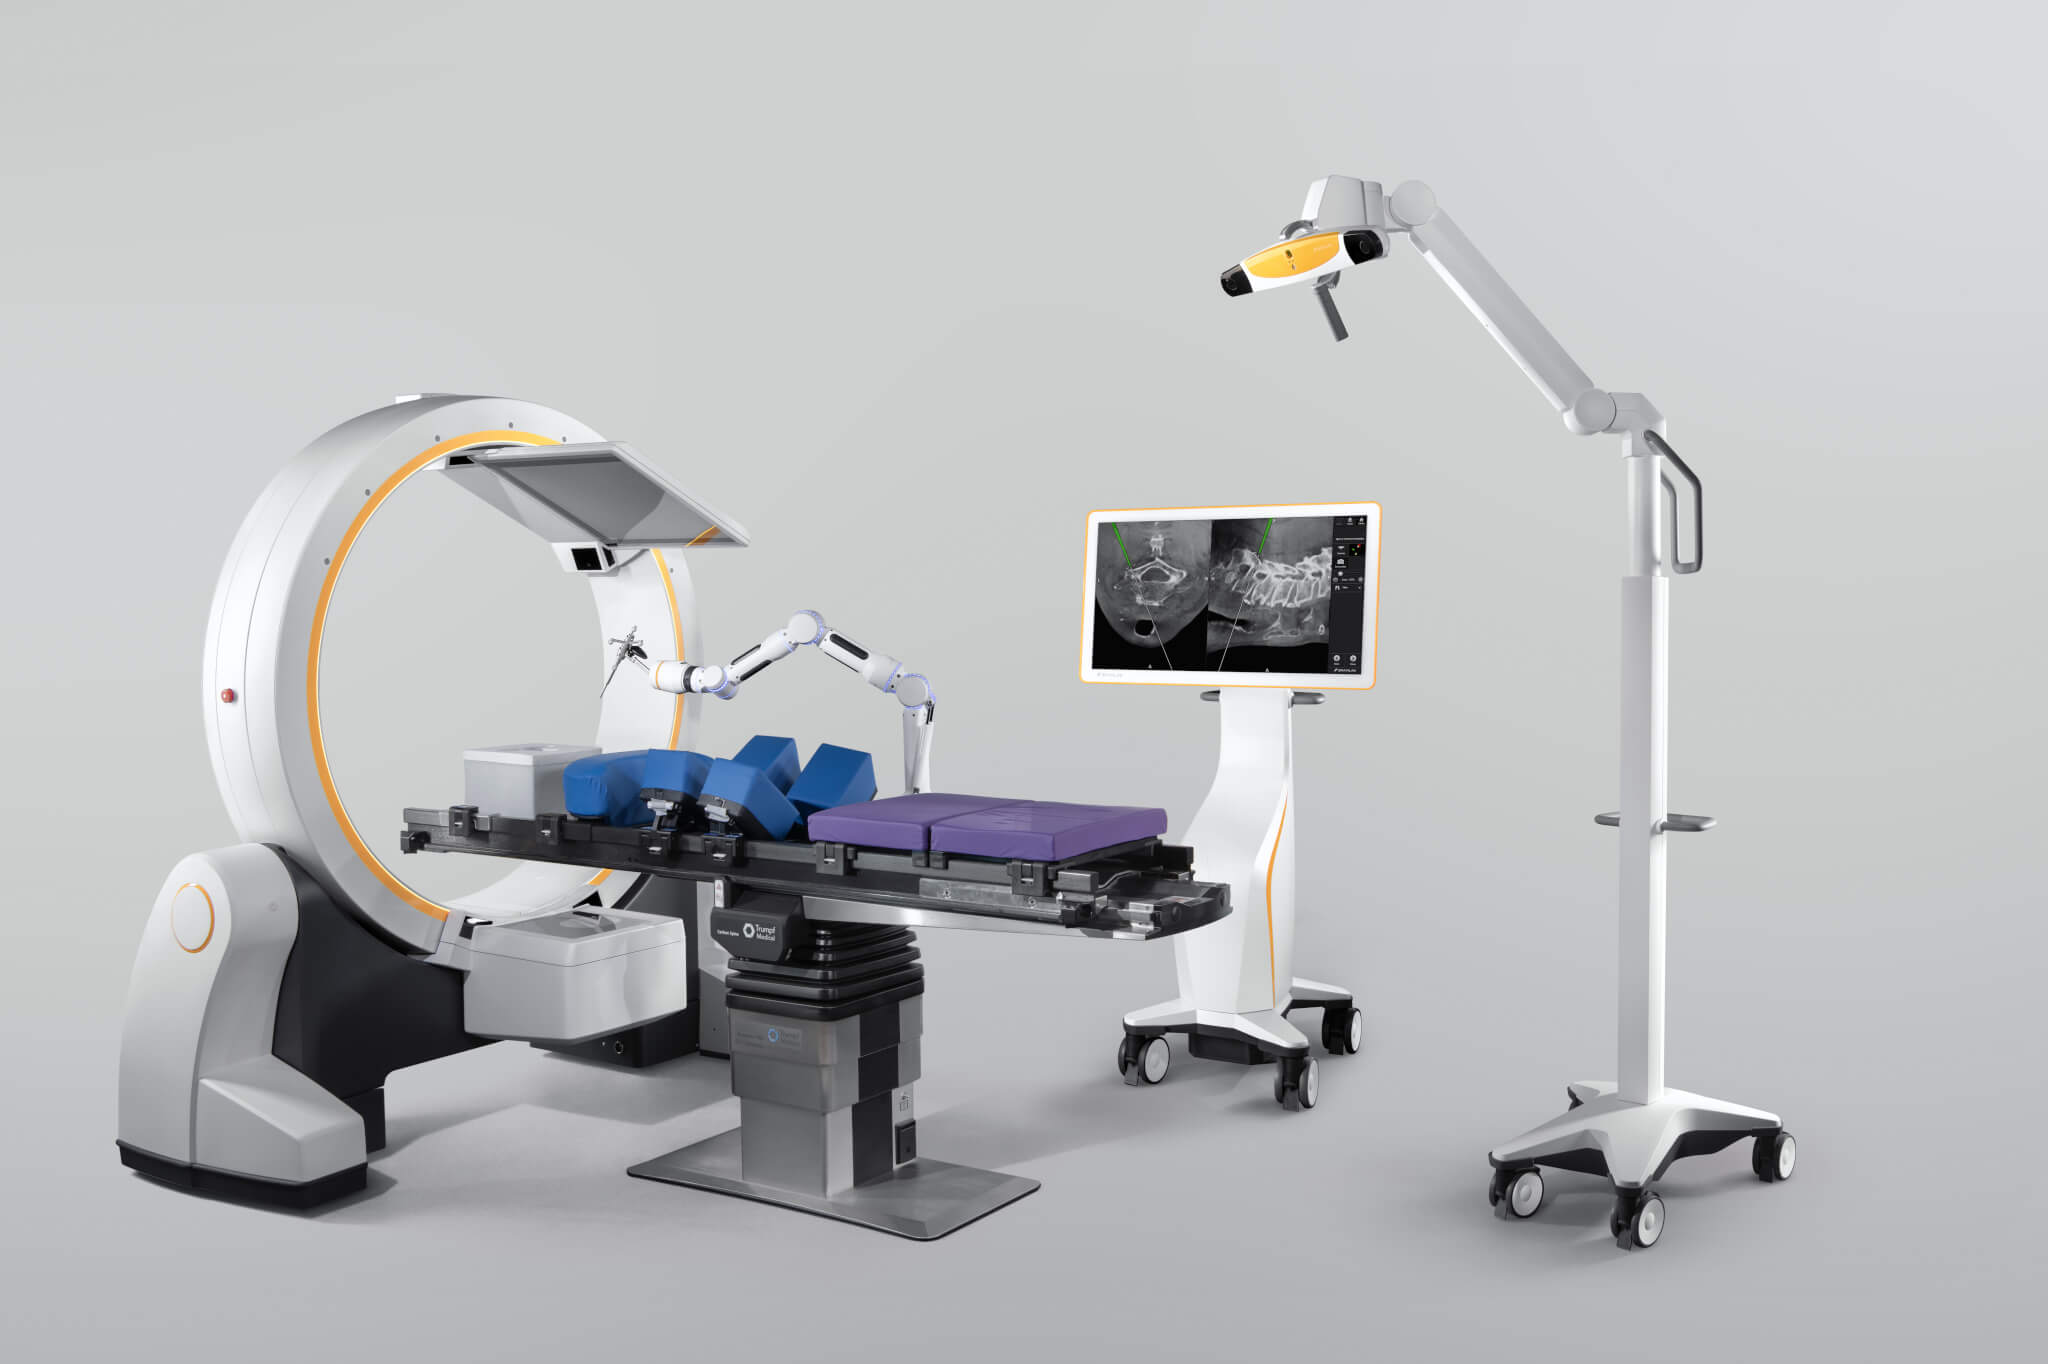 Spine Navigation is the basis for the digitalization of entire spine surgery workflow